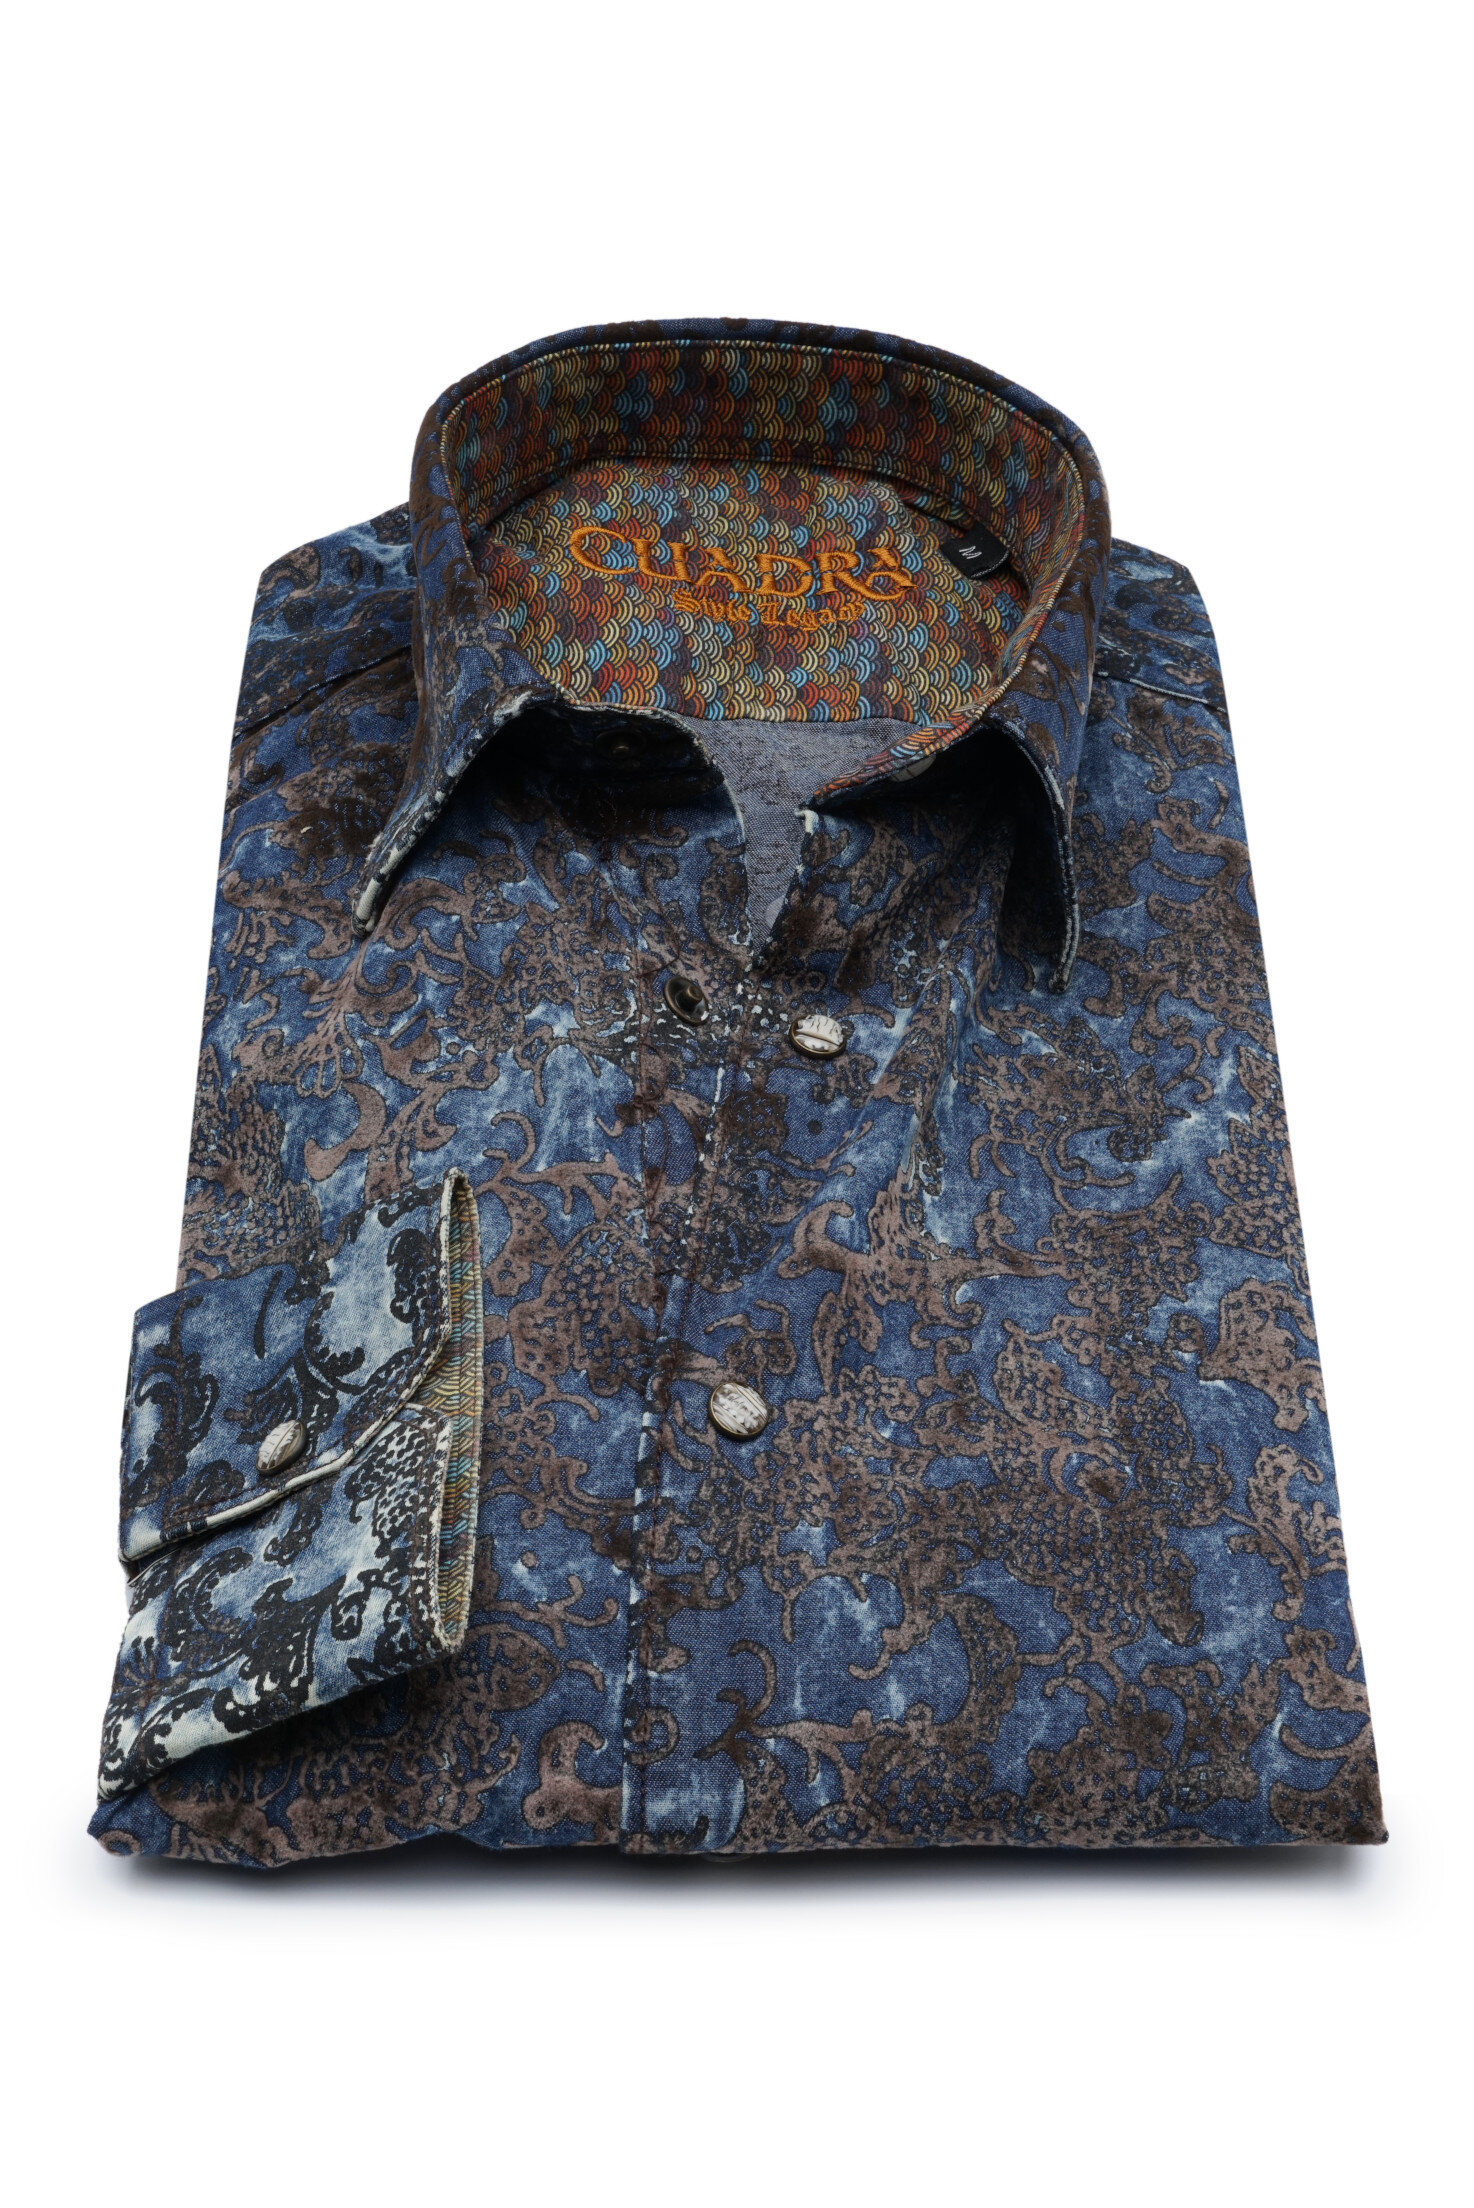 551 DEN005 | Yarn Dyed Shirts | Private Label Shirt Manufacturer | Turkey: % 100 Cotton - Flok Printed - Long Sleeve - Paisley Design - Snap Button - Special Wash - Rich Look - High End